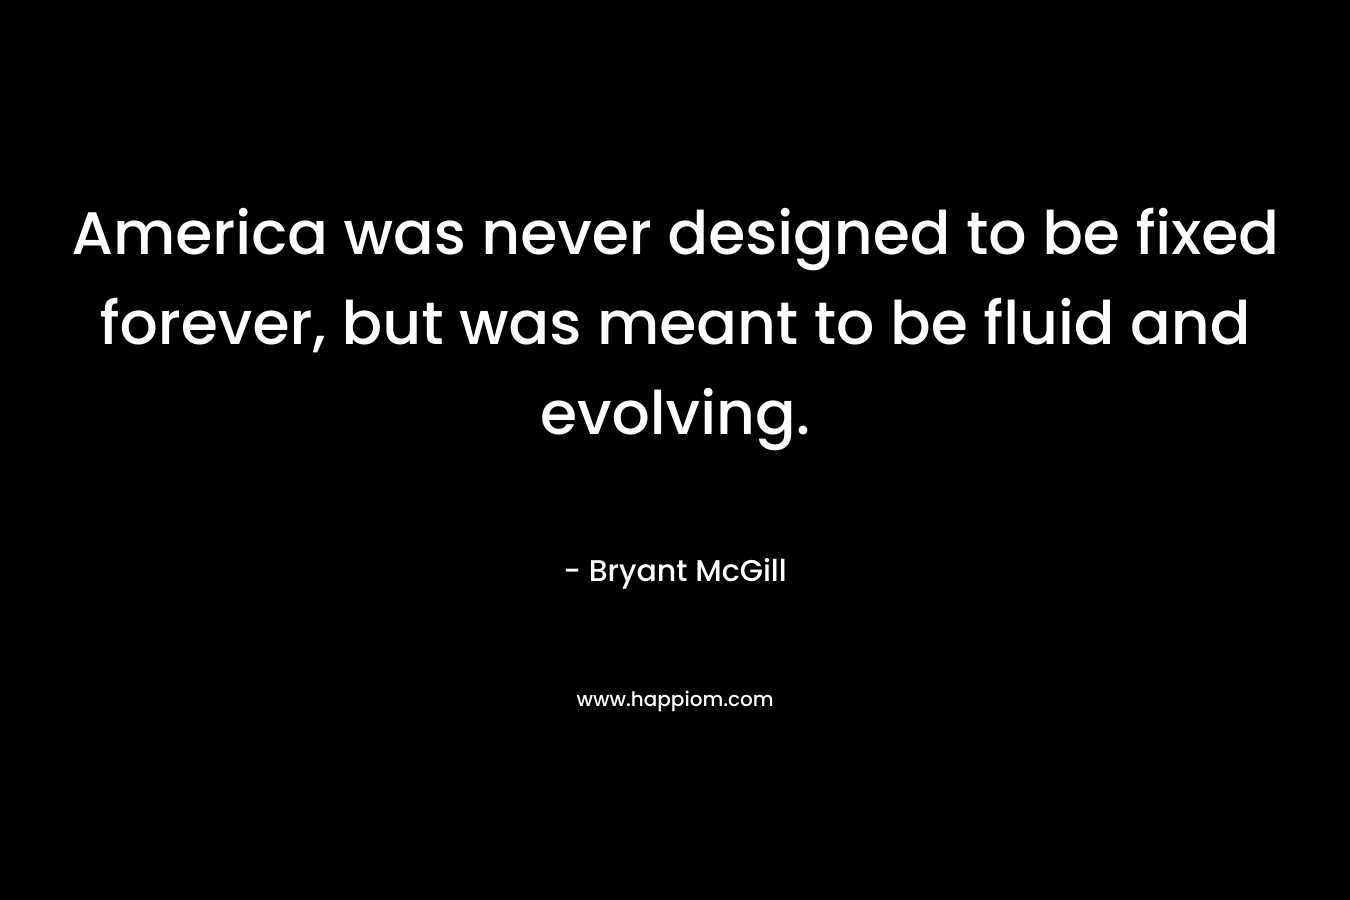 America was never designed to be fixed forever, but was meant to be fluid and evolving. – Bryant McGill